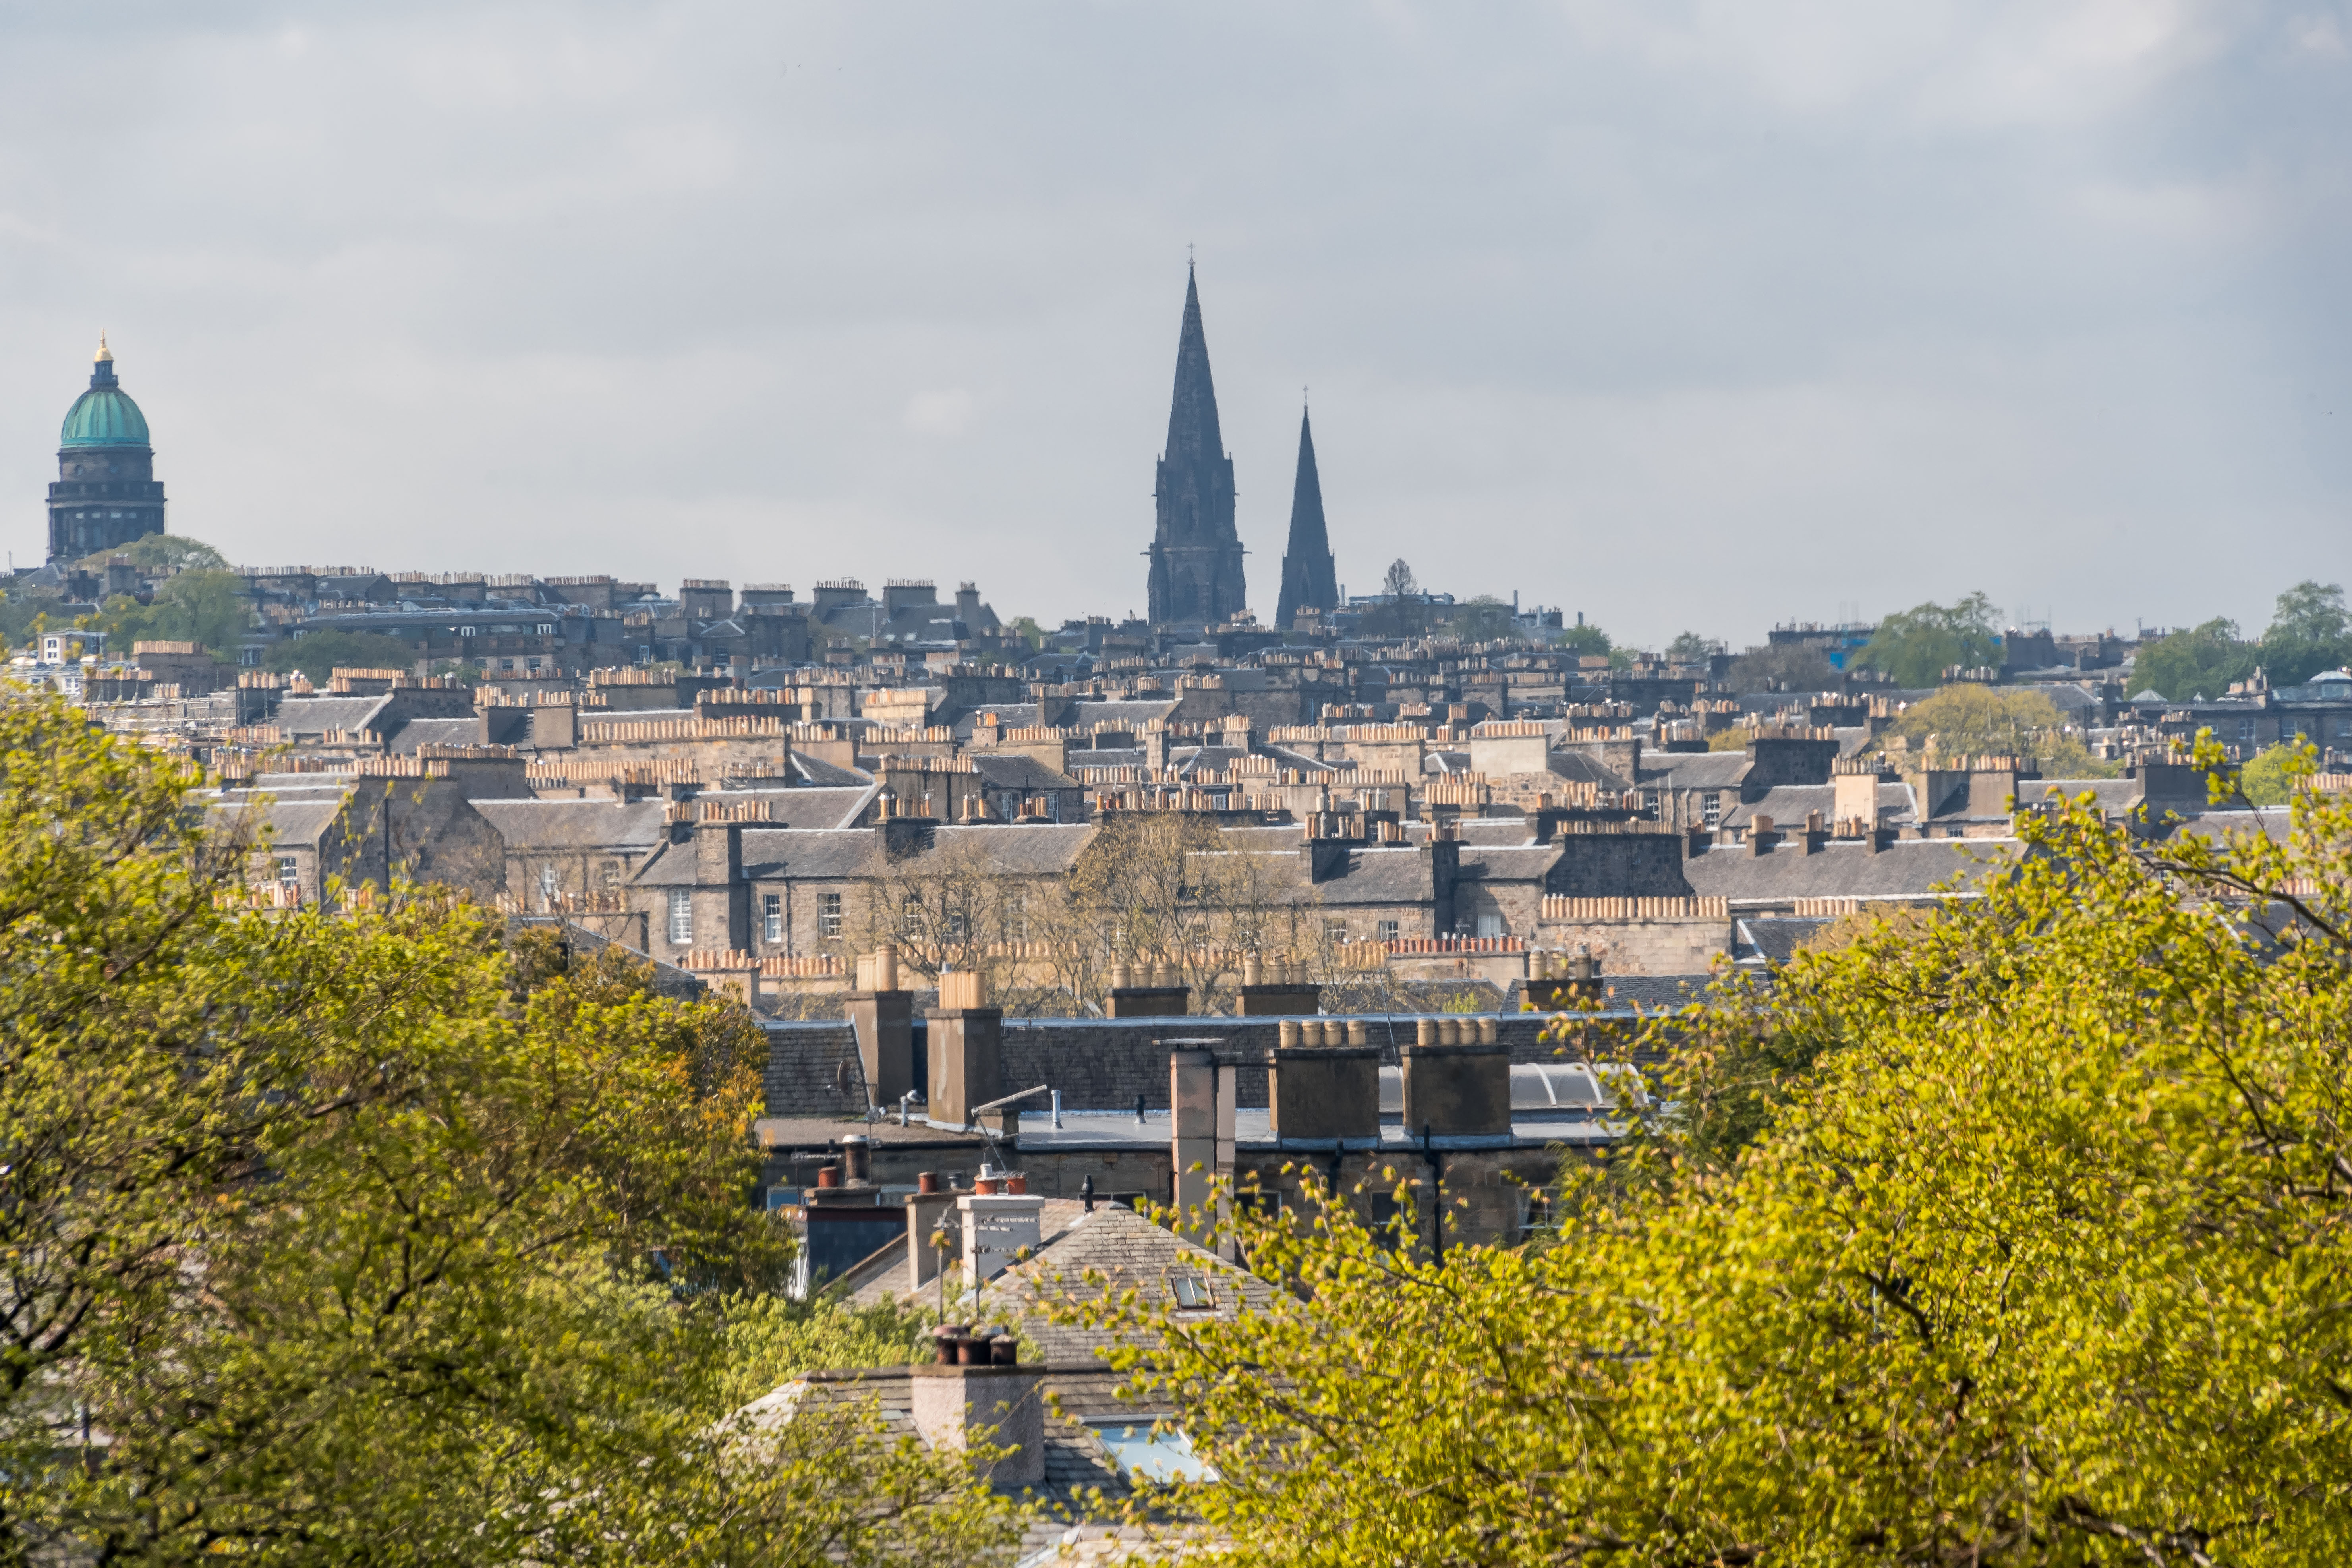 Edinburgh your staycation 'outdoor' city of dreams